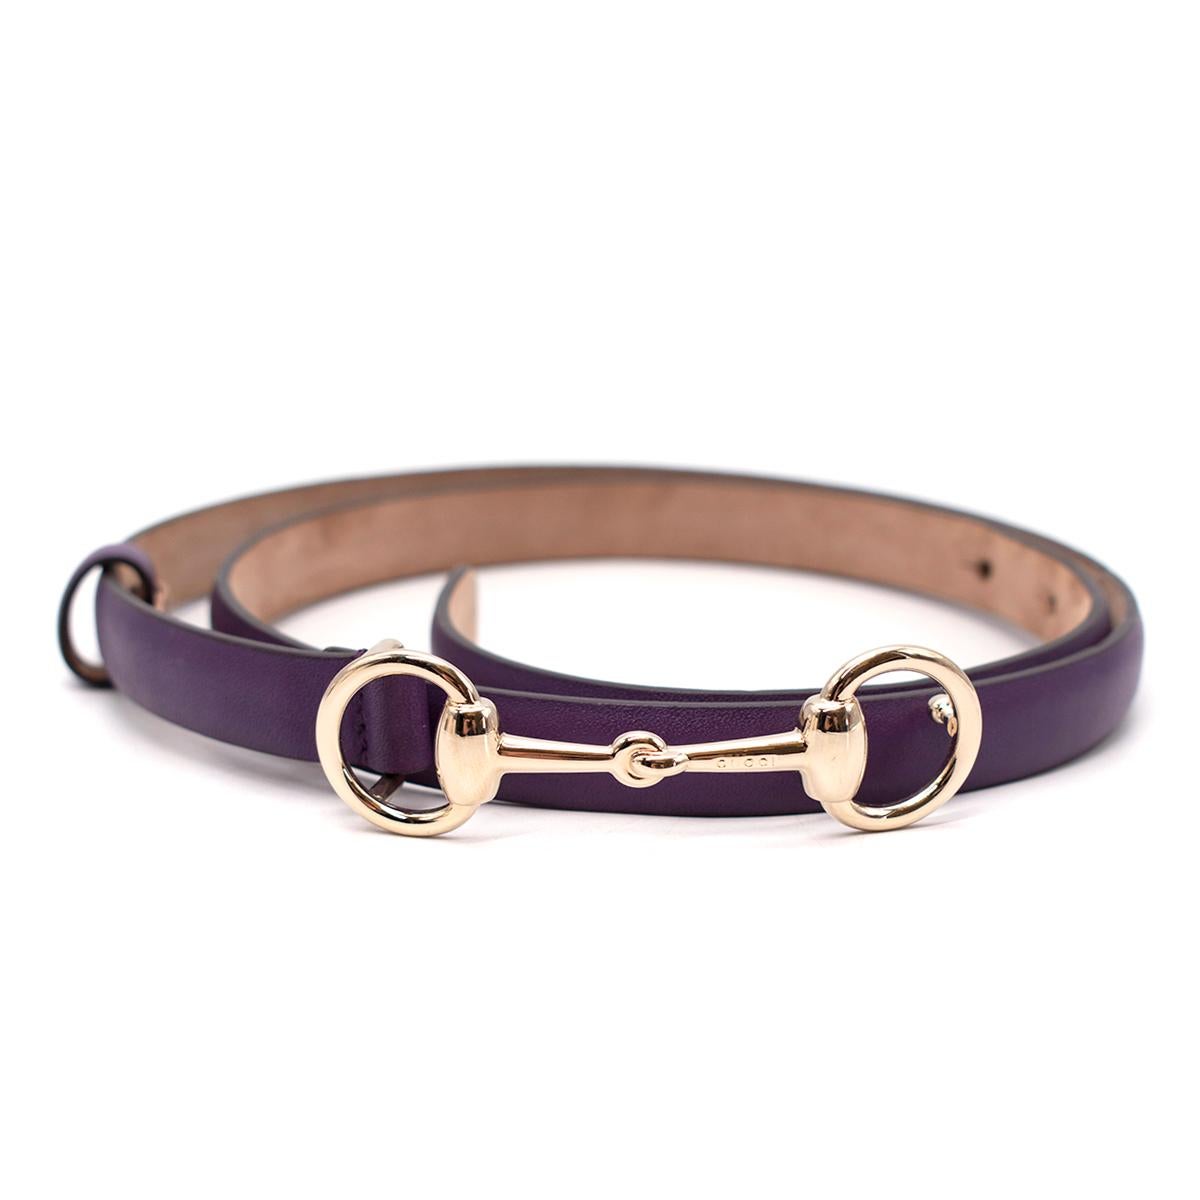 Gucci Purple Leather Pale Gold-Tone Horsebit Belt 85

- Narrow leather belt in a purple tone
- Pale gold-tone Horsebit press-stud fastening
- Can be worn on the waist or hip

Materials:
Leather

Measurements:
Length - 96cm
Width - 1.5cm

Made in